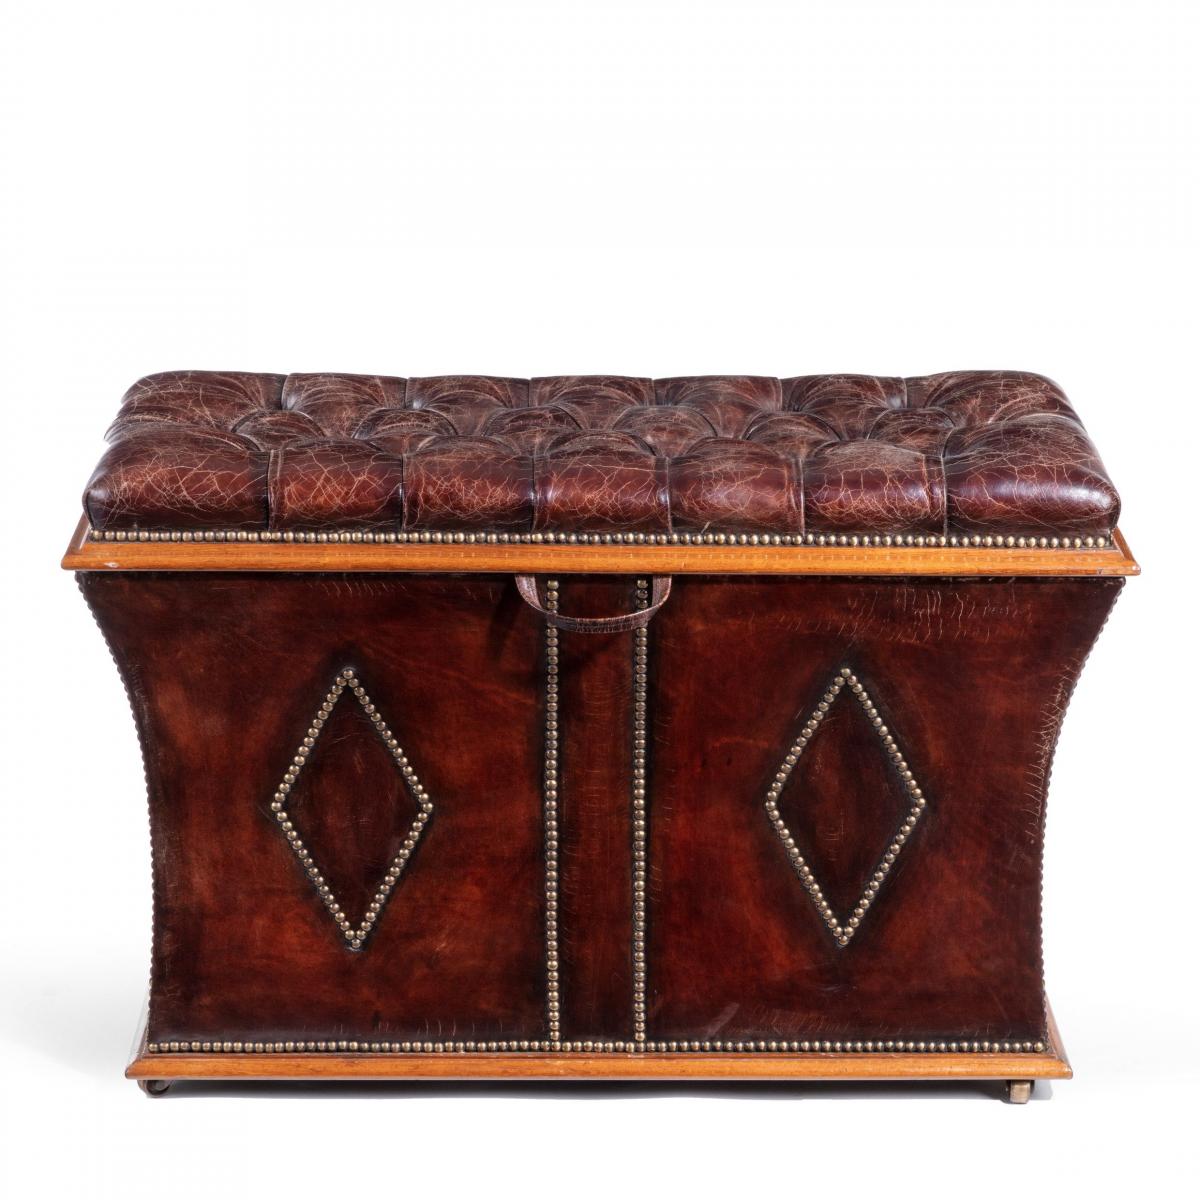 An unusual shaped William IV rosewood framed box ottoman